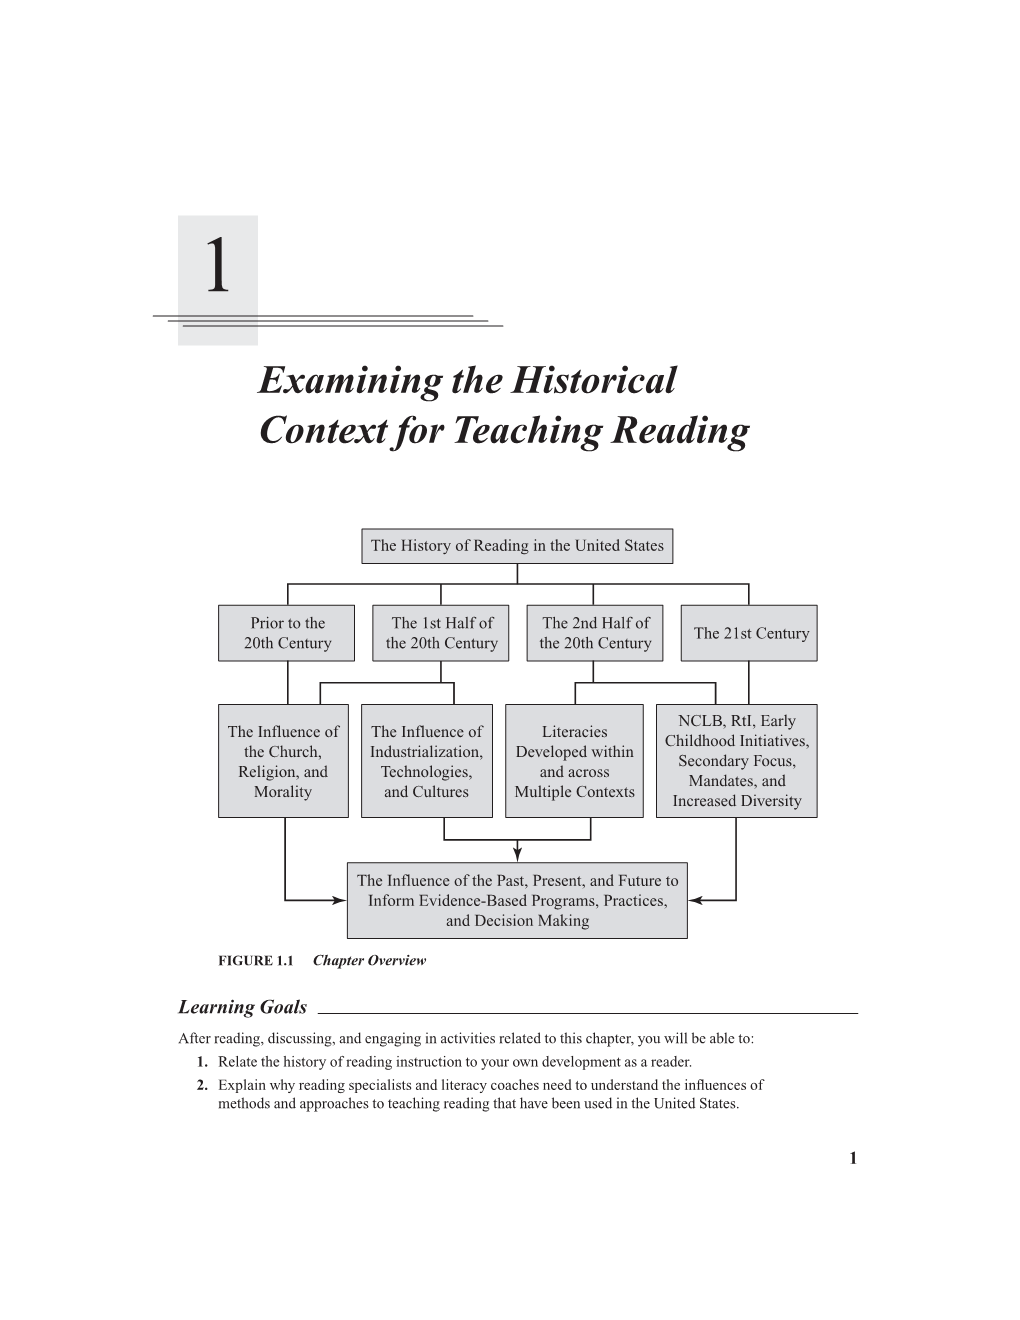 Examining the Historical Context for Teaching Reading